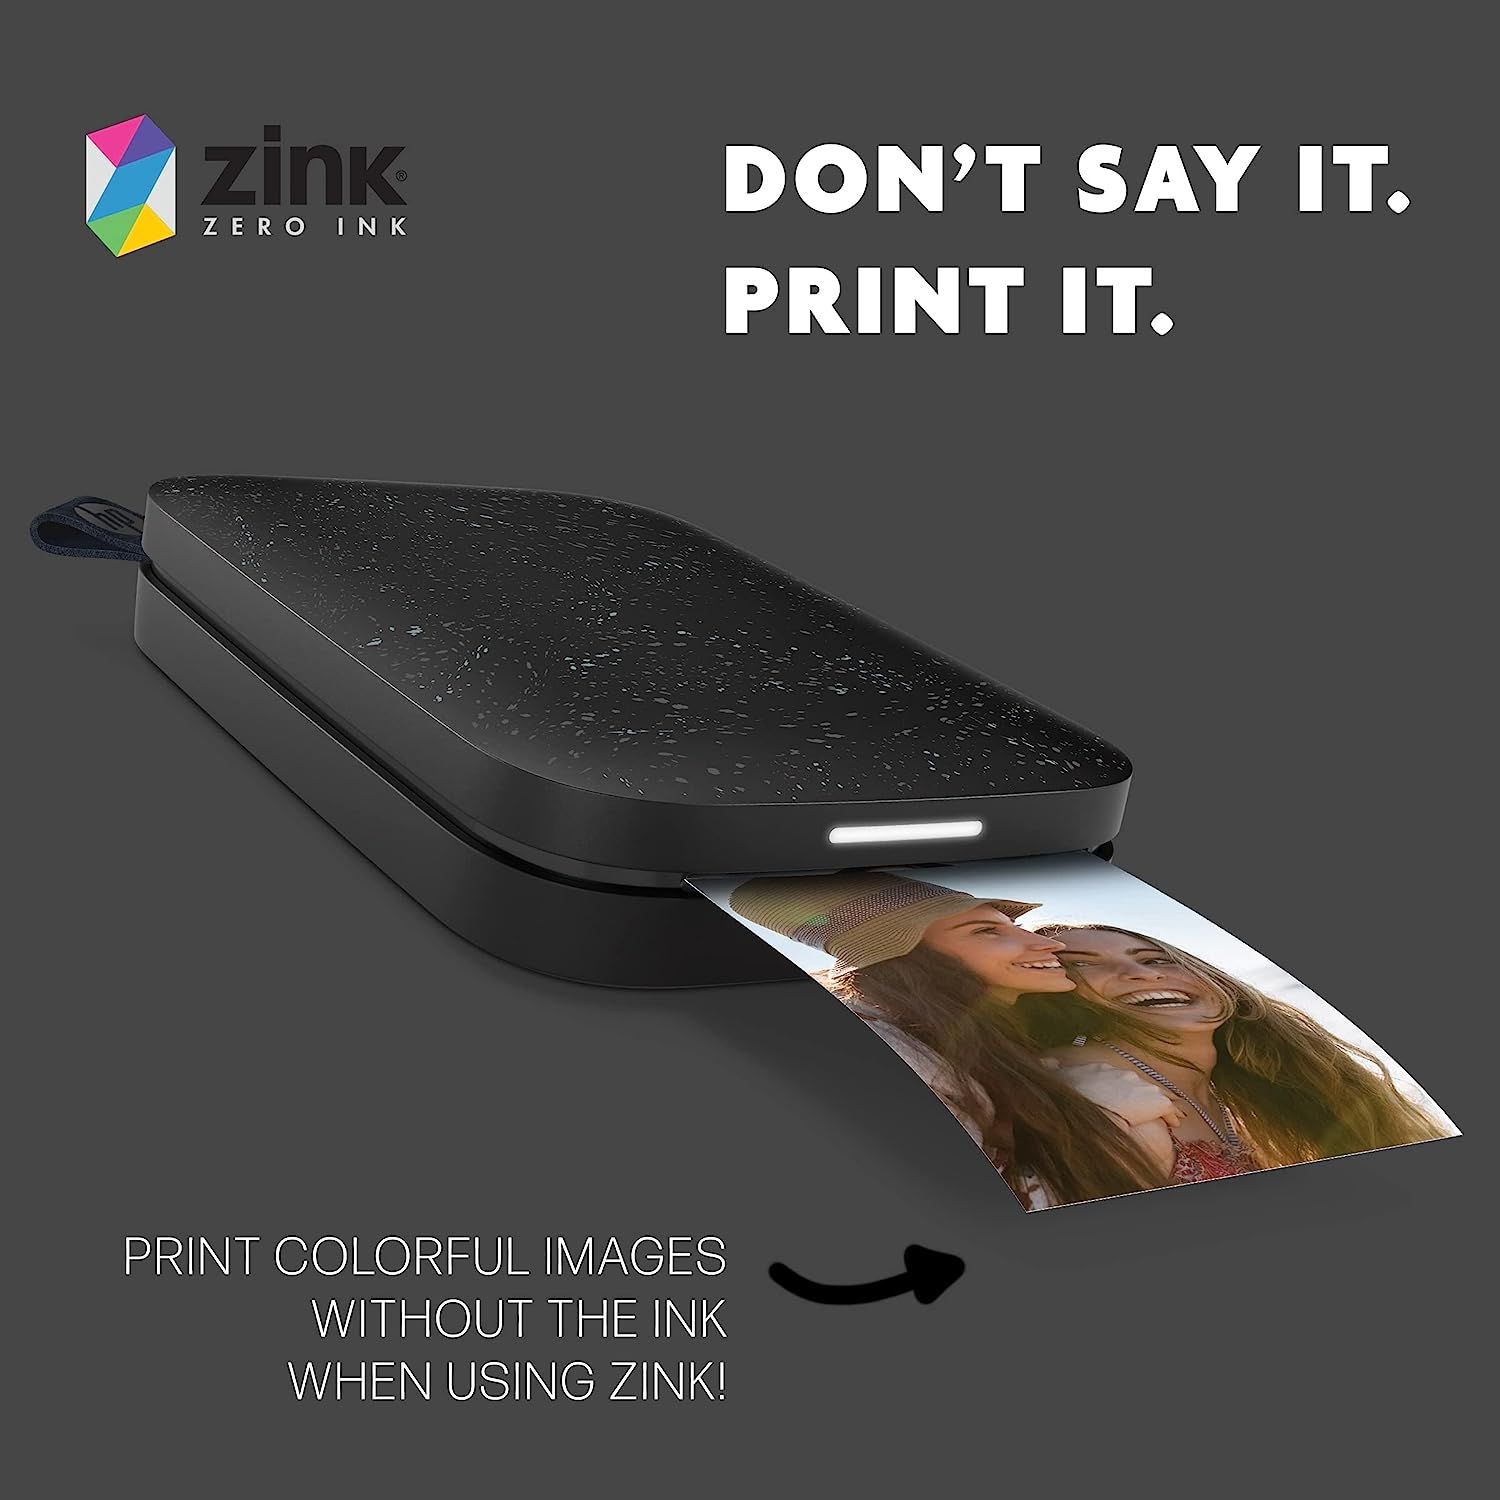 Canon 3215C001 IVY ZINK photo printer paper, 50 sheets : CANON: :  Office Products